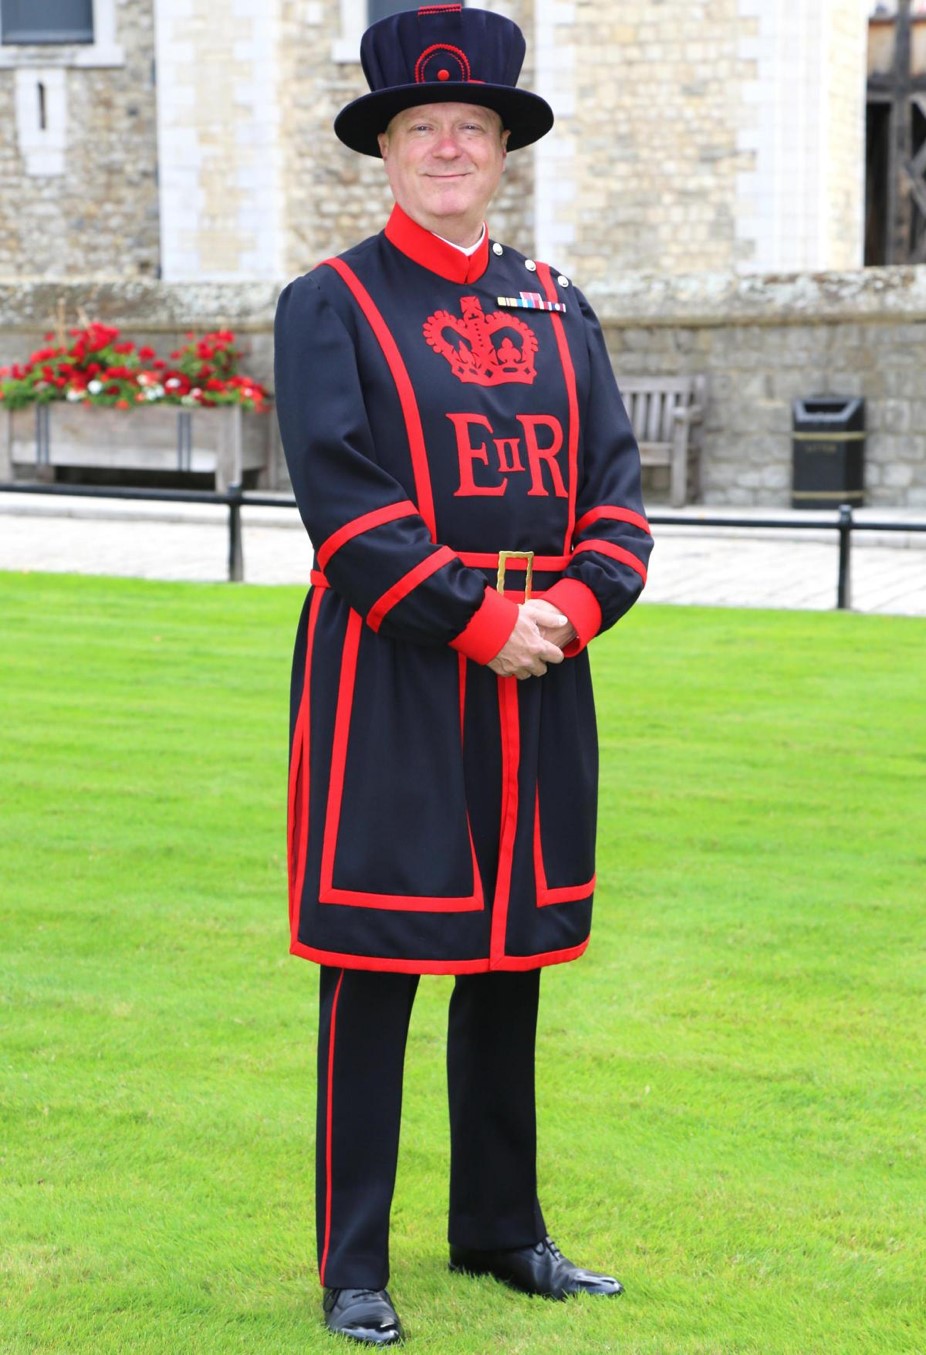 Yeoman Warden Barry Stringer MBE is pictured in full Yeoman Warden attire.